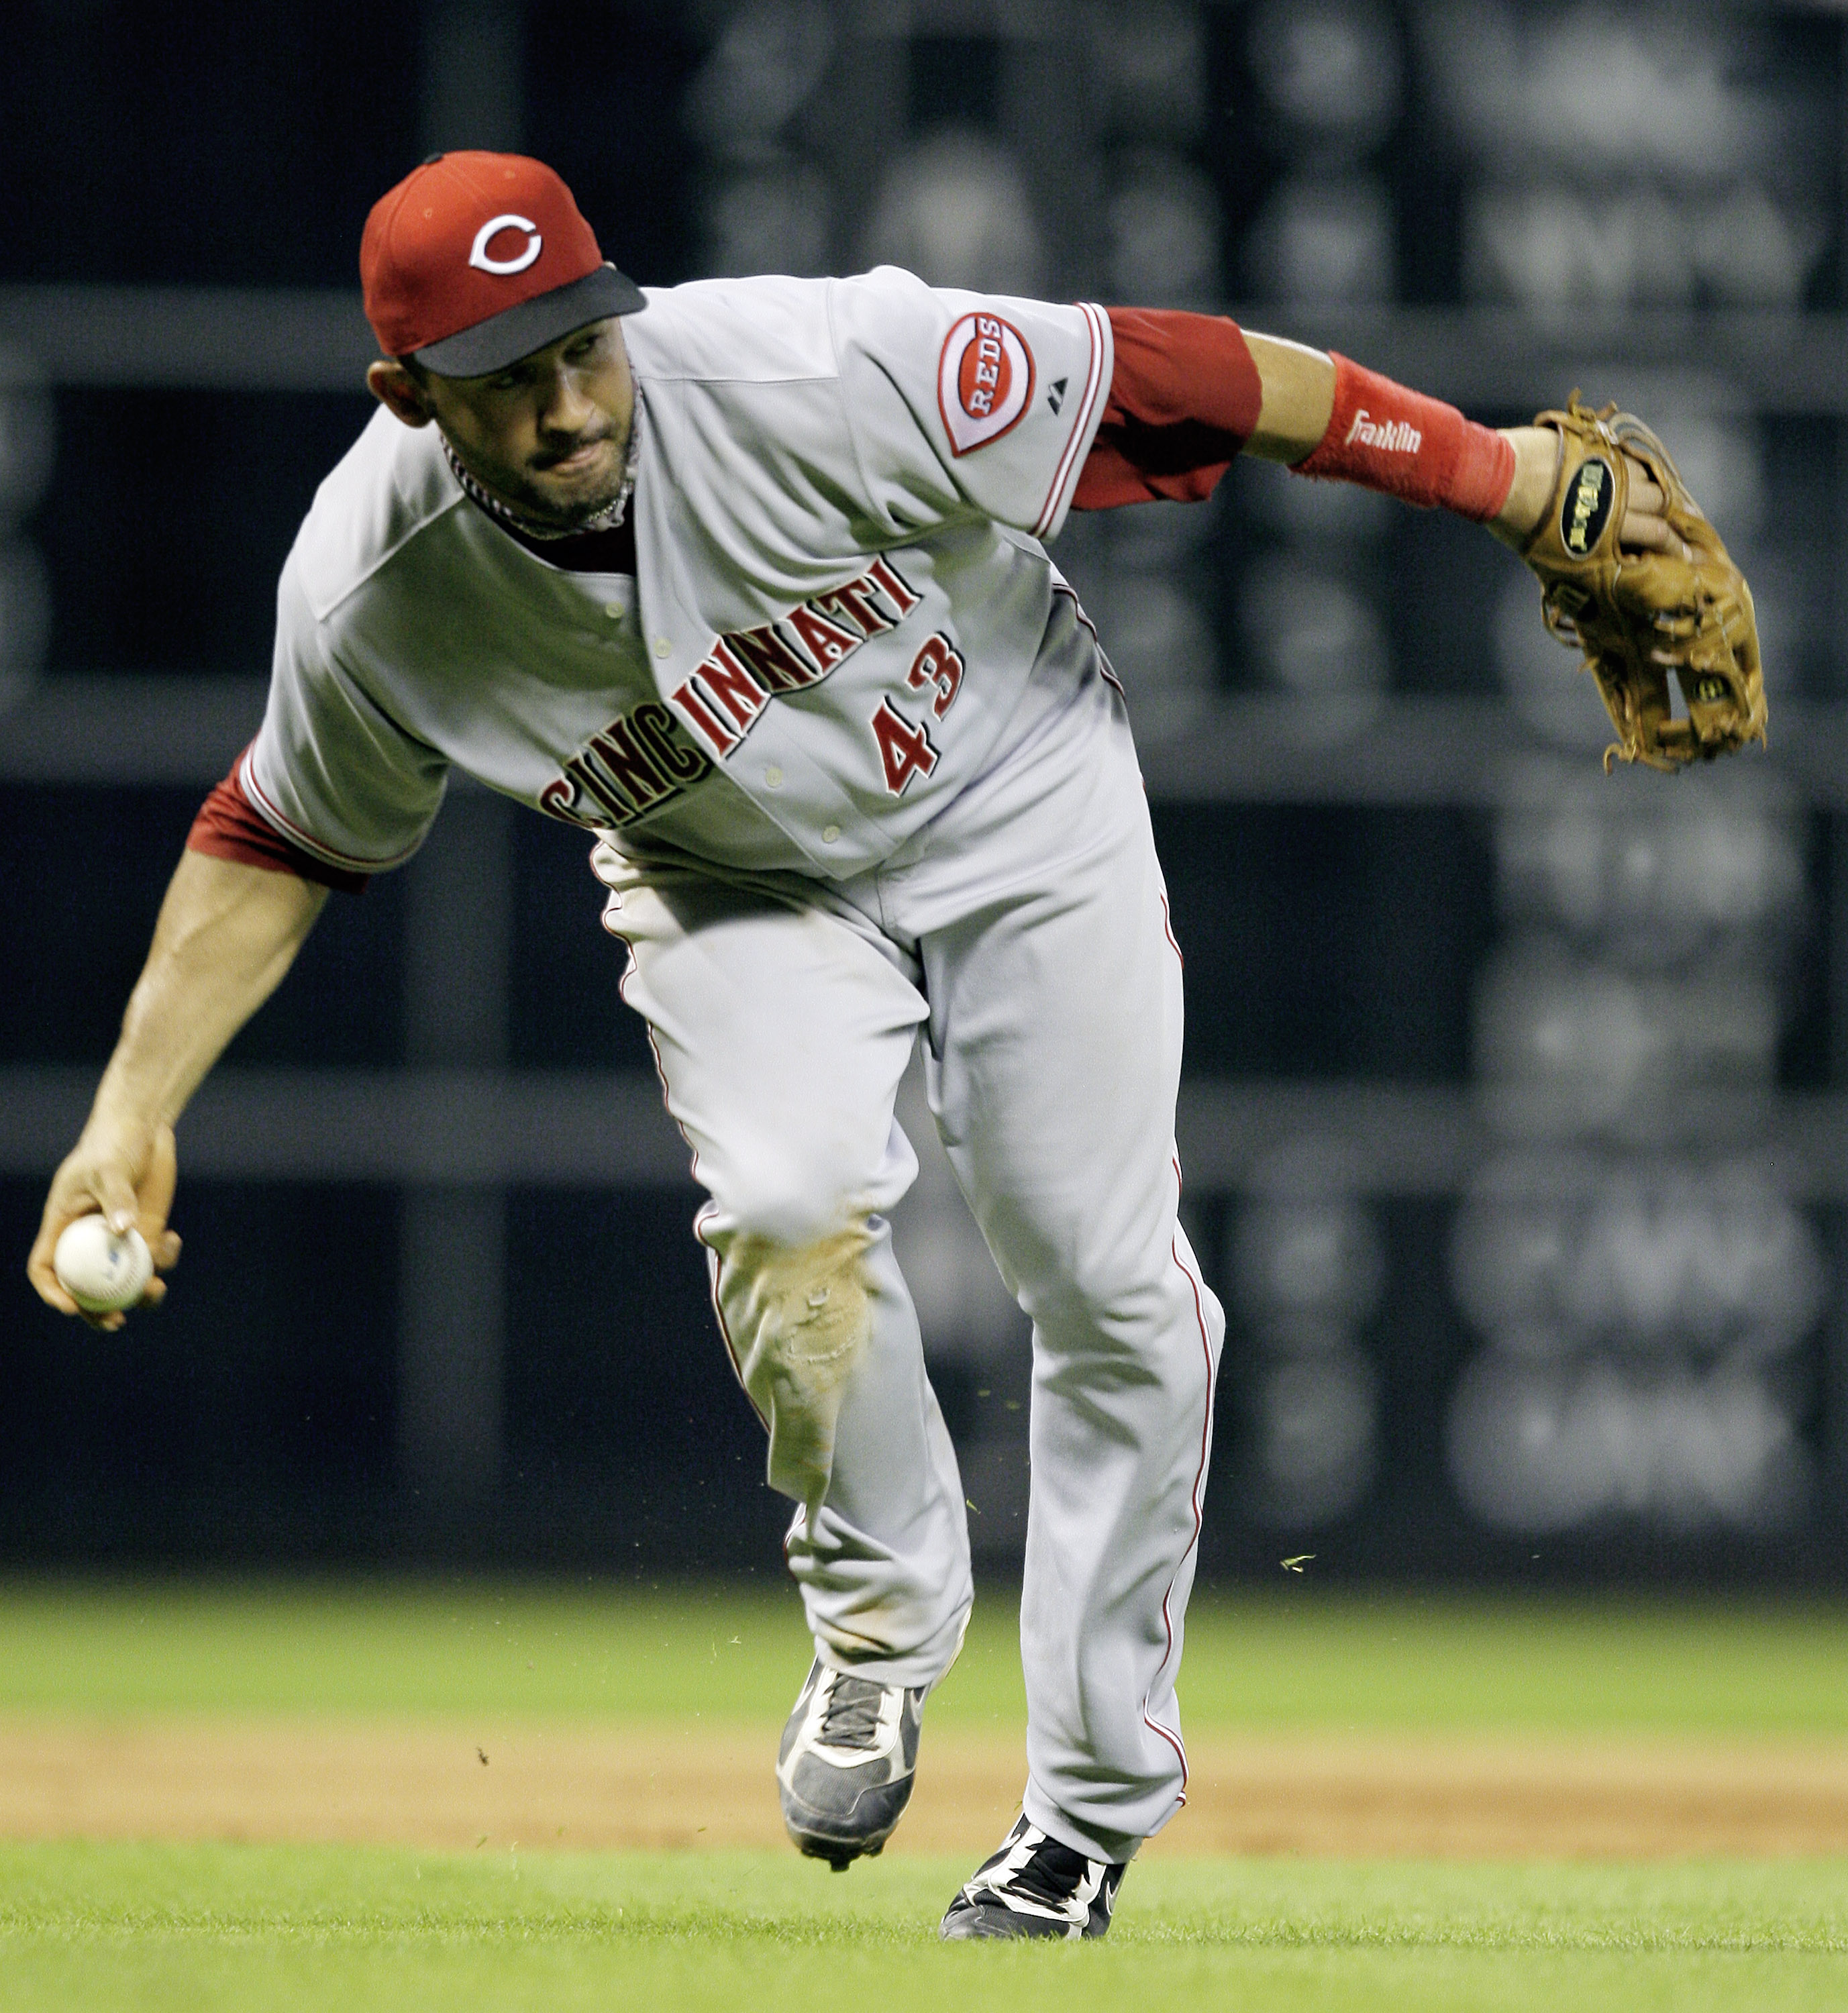 HOUSTON - JULY 23:  Third baseman Miguel Cairo #43 of the Cincinnati Reds makes a play on a slow roller against the Houston Astros at Minute Maid Park on July 23, 2010 in Houston, Texas.  (Photo by Bob Levey/Getty Images)